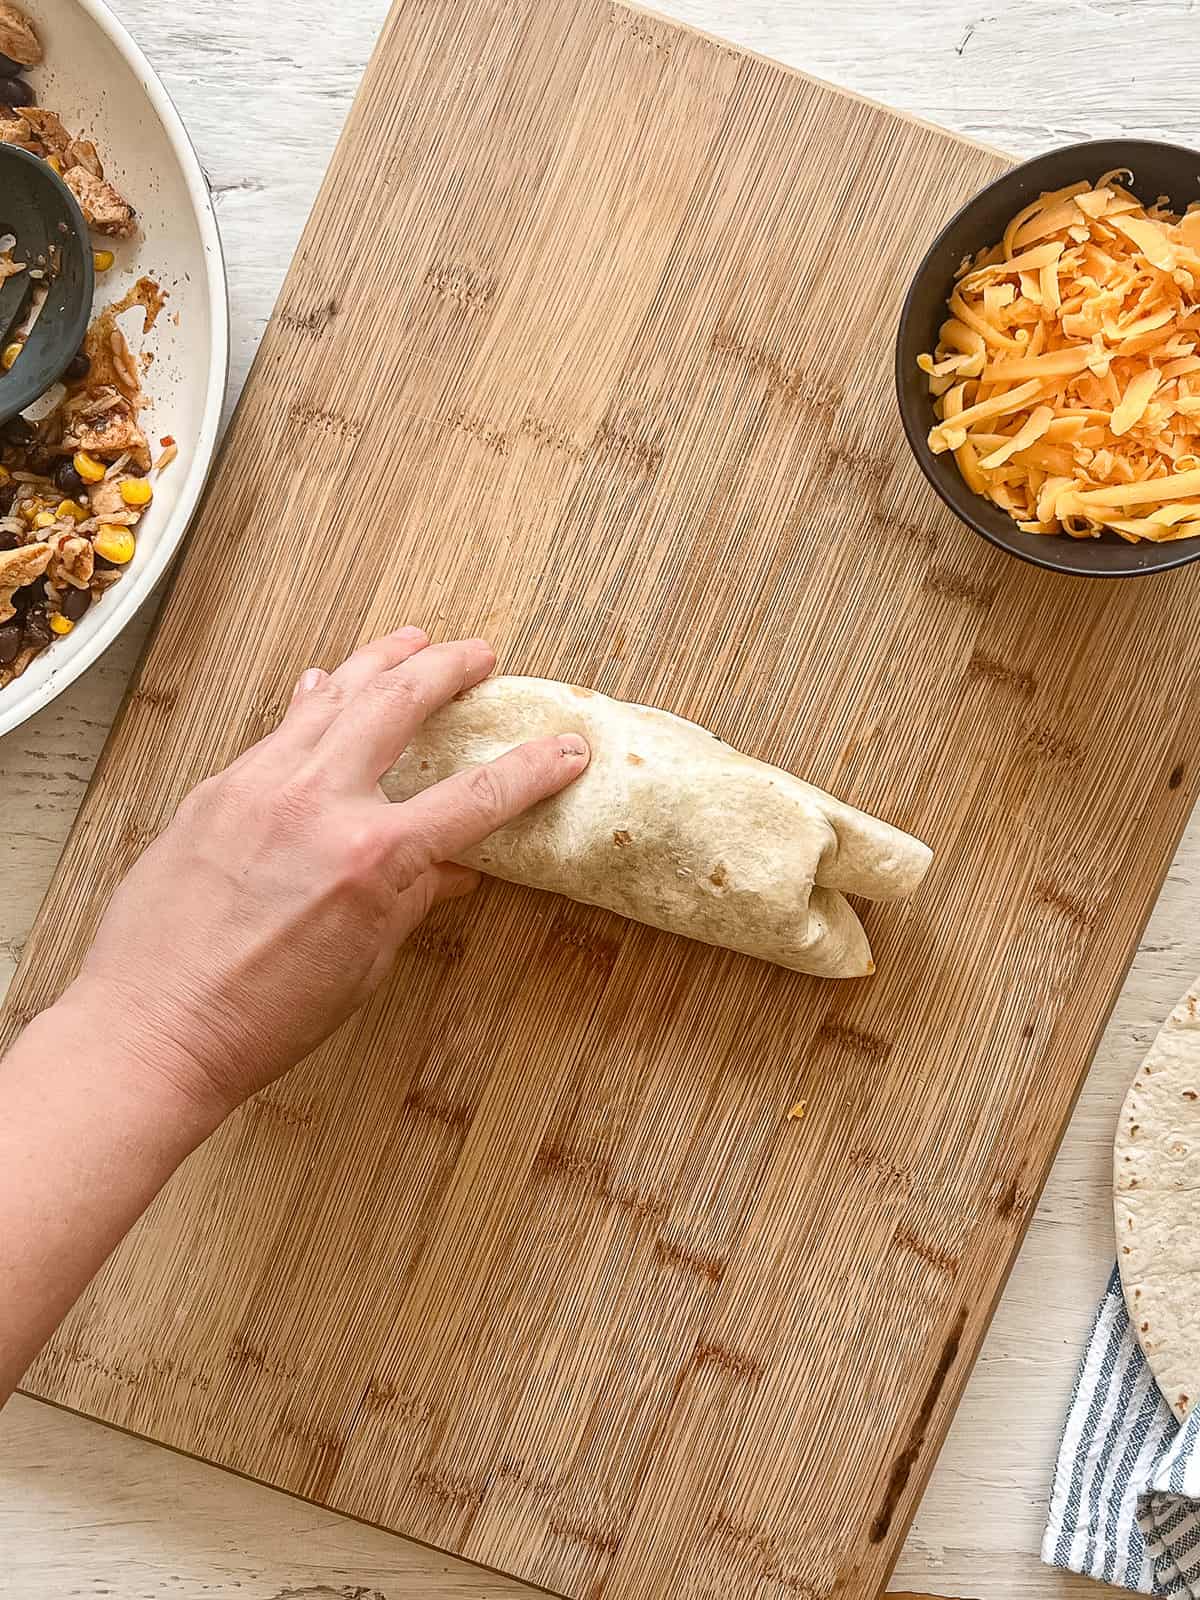 One hand is holding together a wrapped tortilla with chicken burrito ingredients inside on a wooden cutting board.